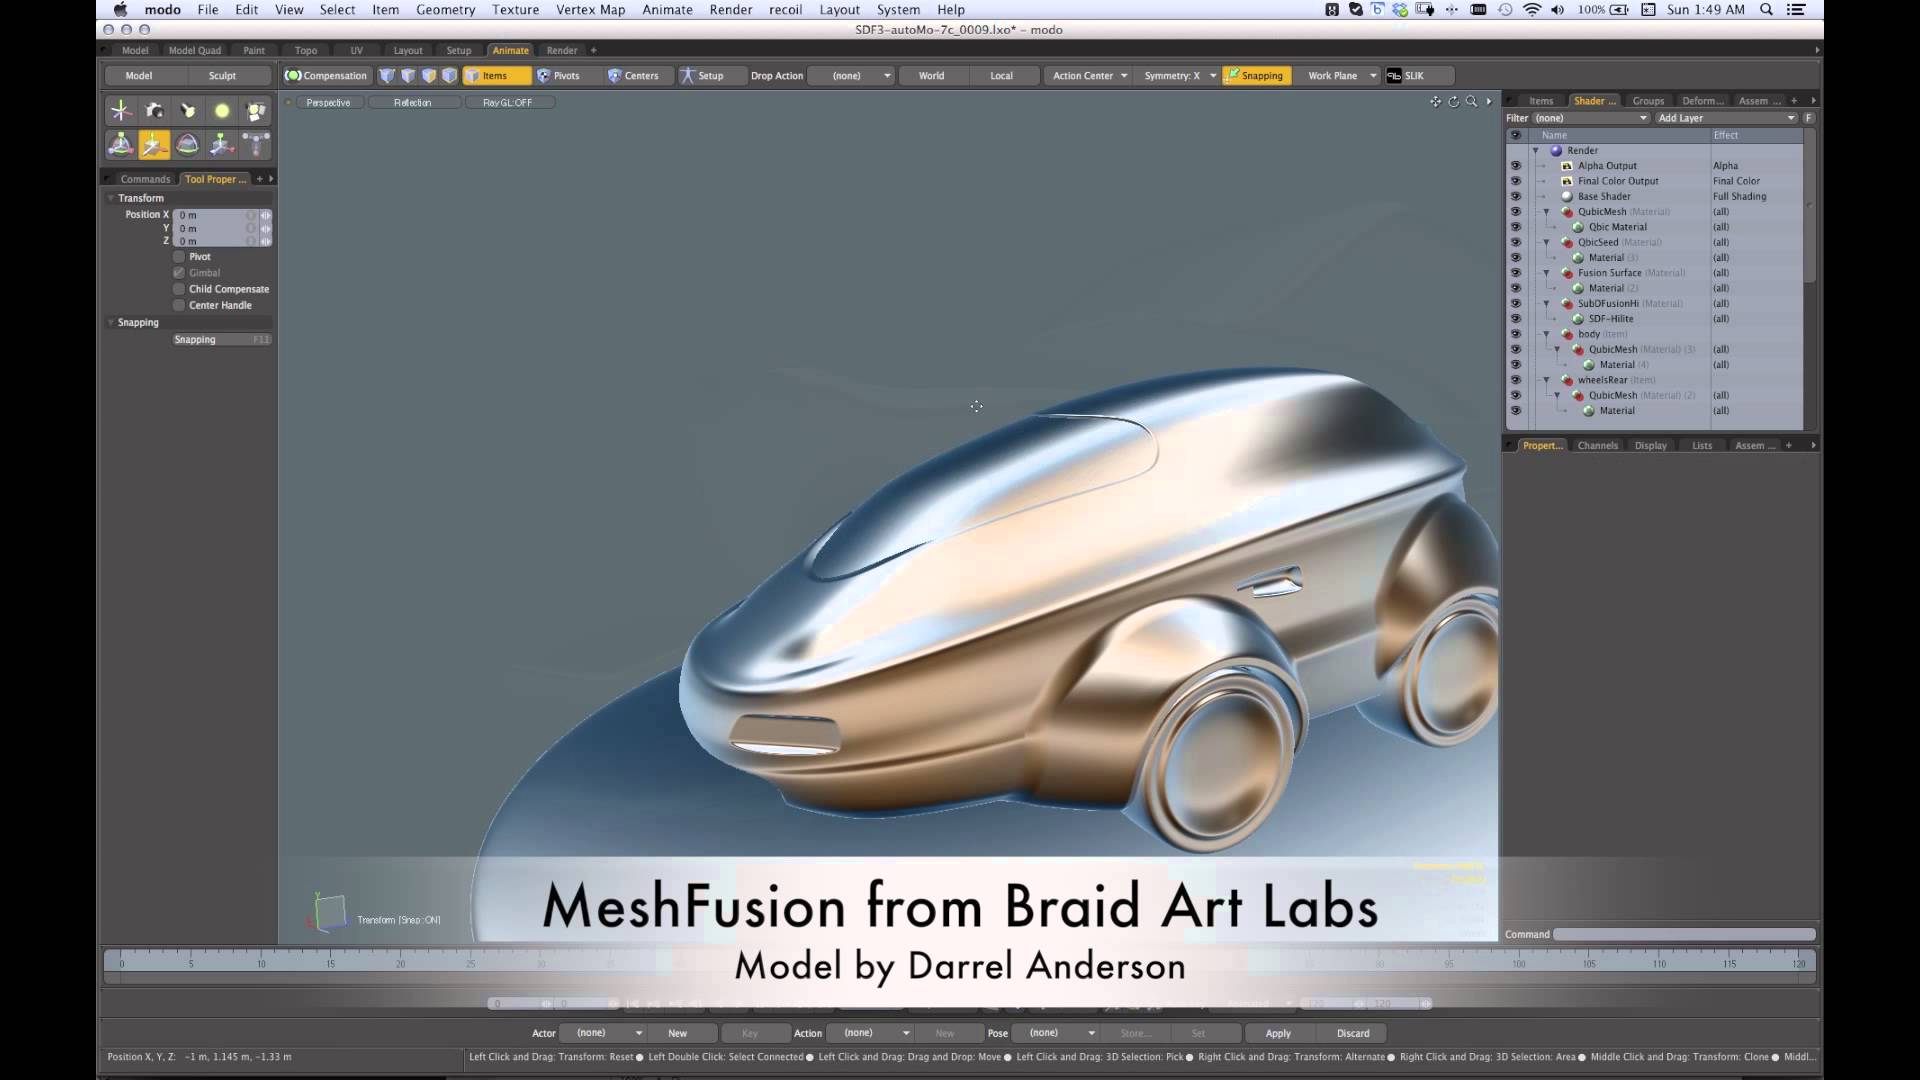 SubDFusion from Braid Art Labs